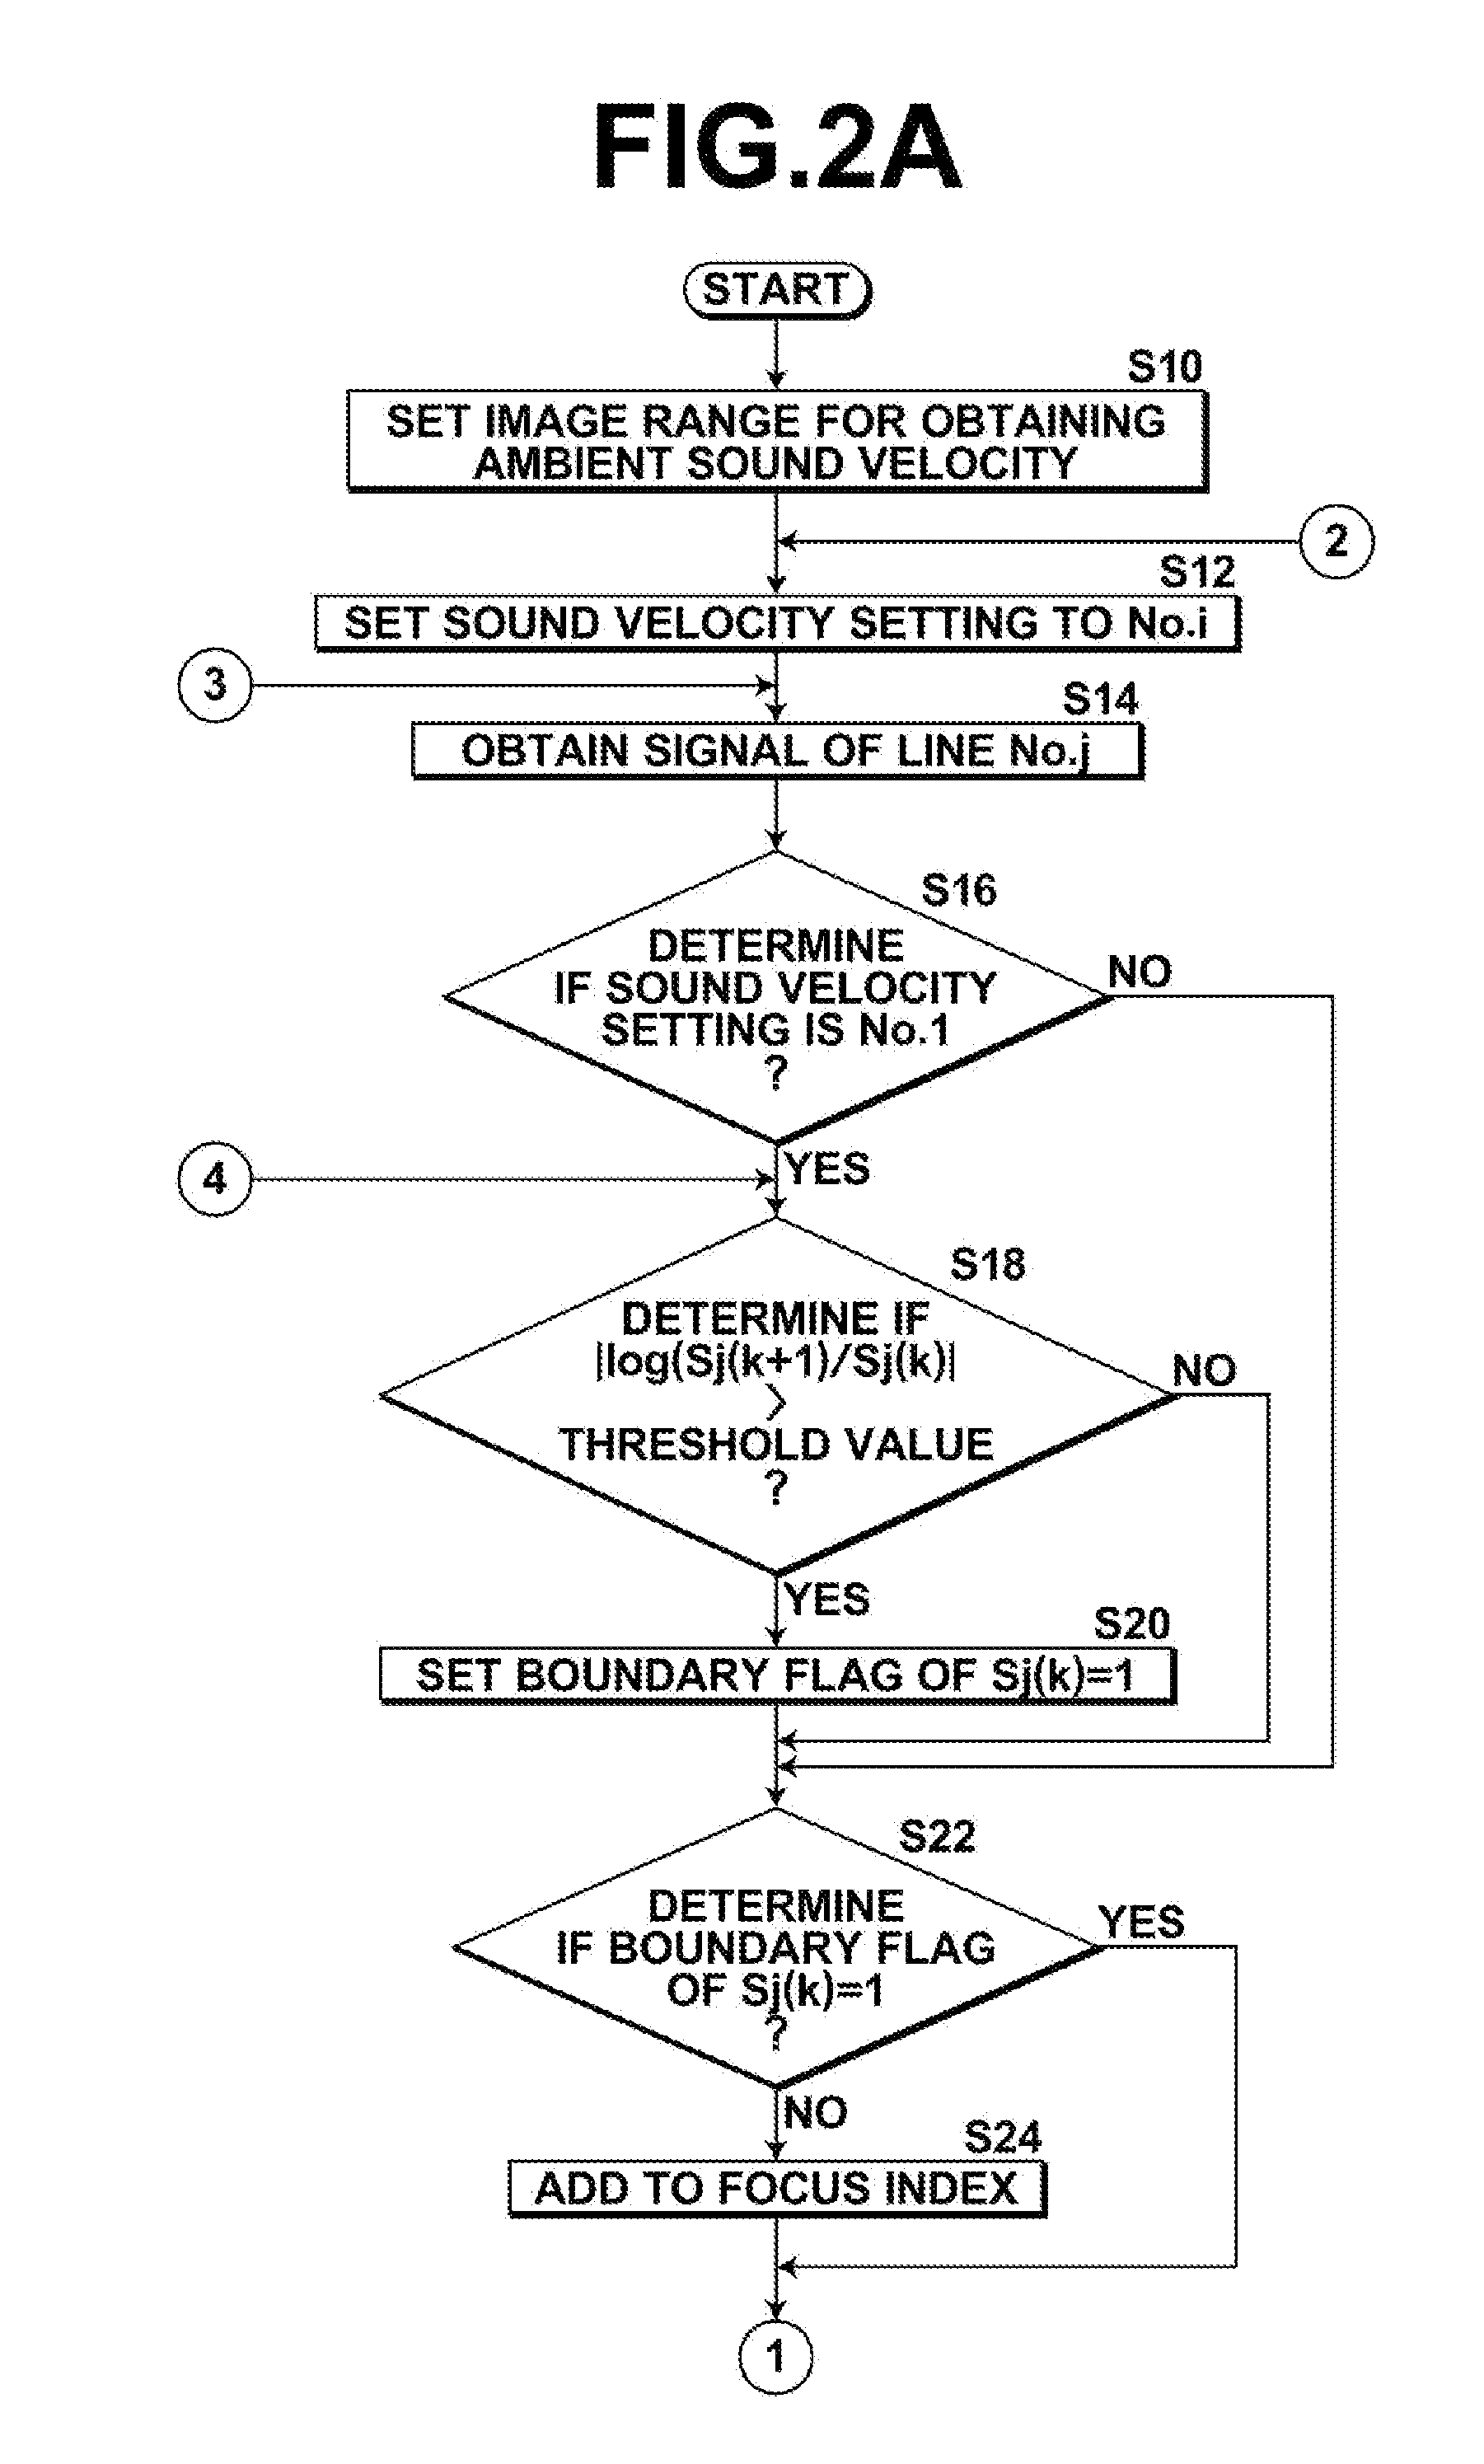 Ambient sound velocity obtaining method and apparatus